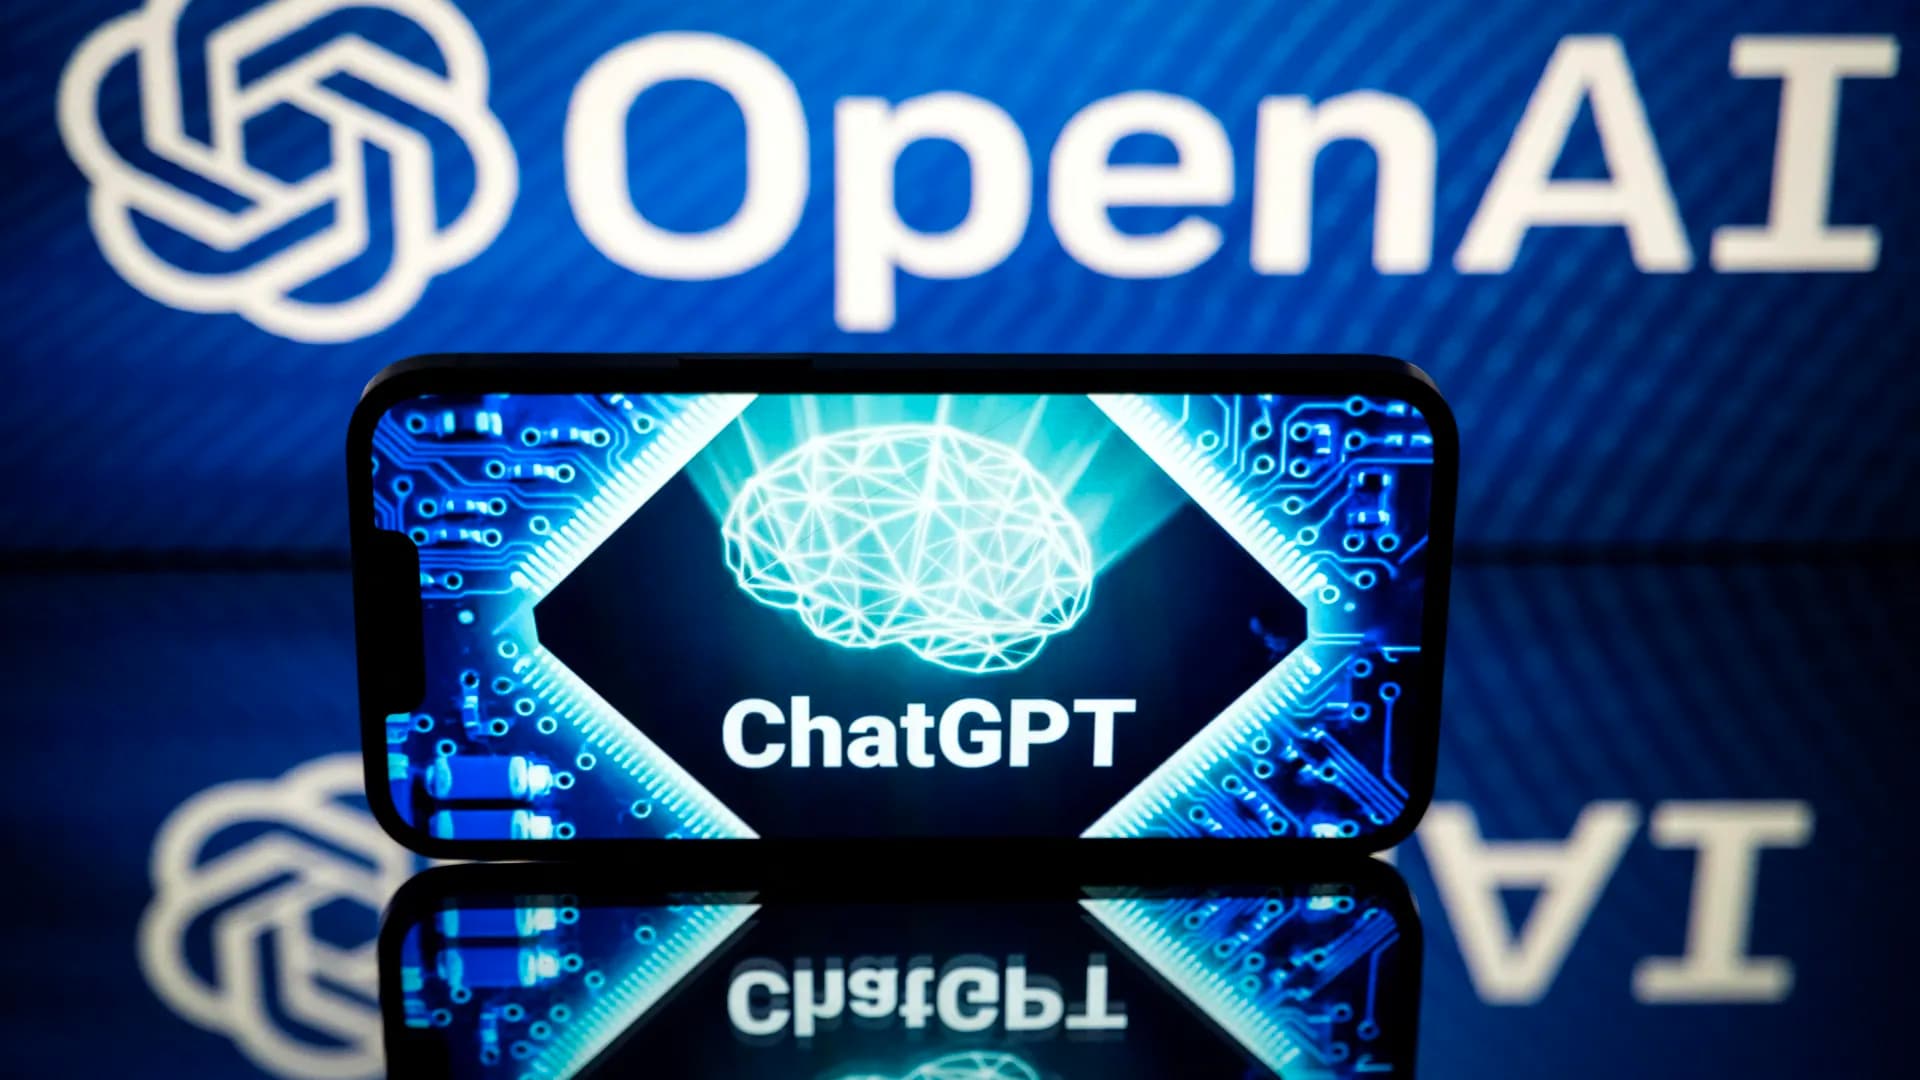 Fed up with expensive AI chips, OpenAI is now planning to start making its own AI chips